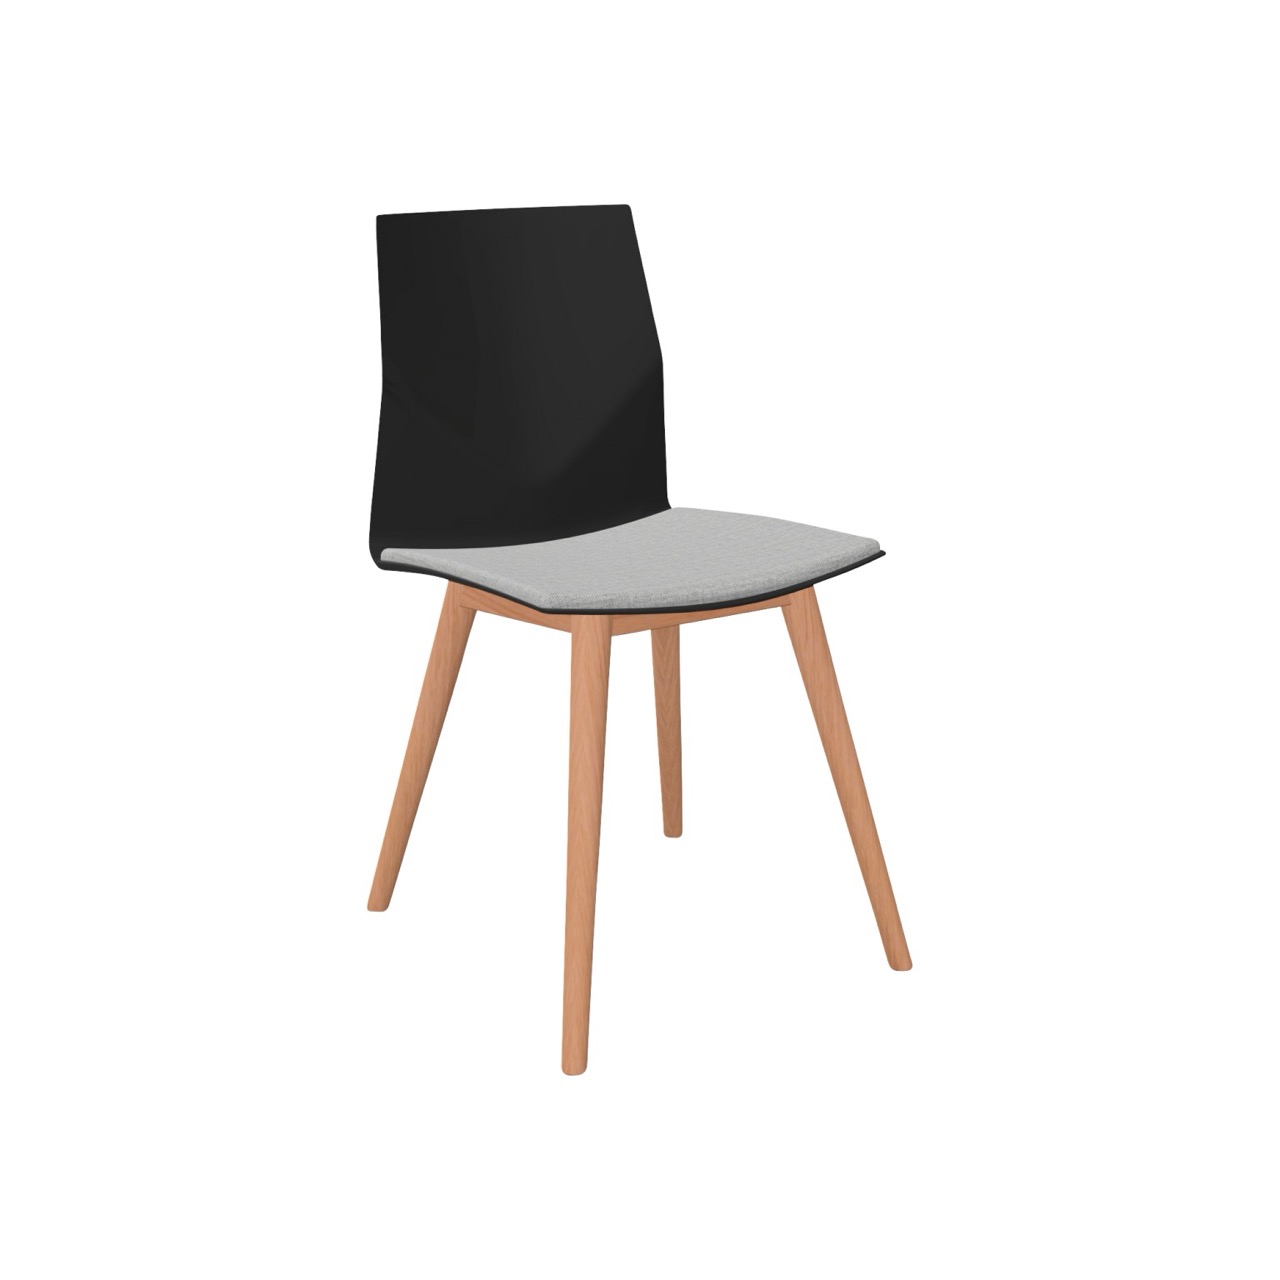 OCEE&FOUR – Chairs – FourCast 2 Four (Wooden Legs) – Packshot Image 1 Large